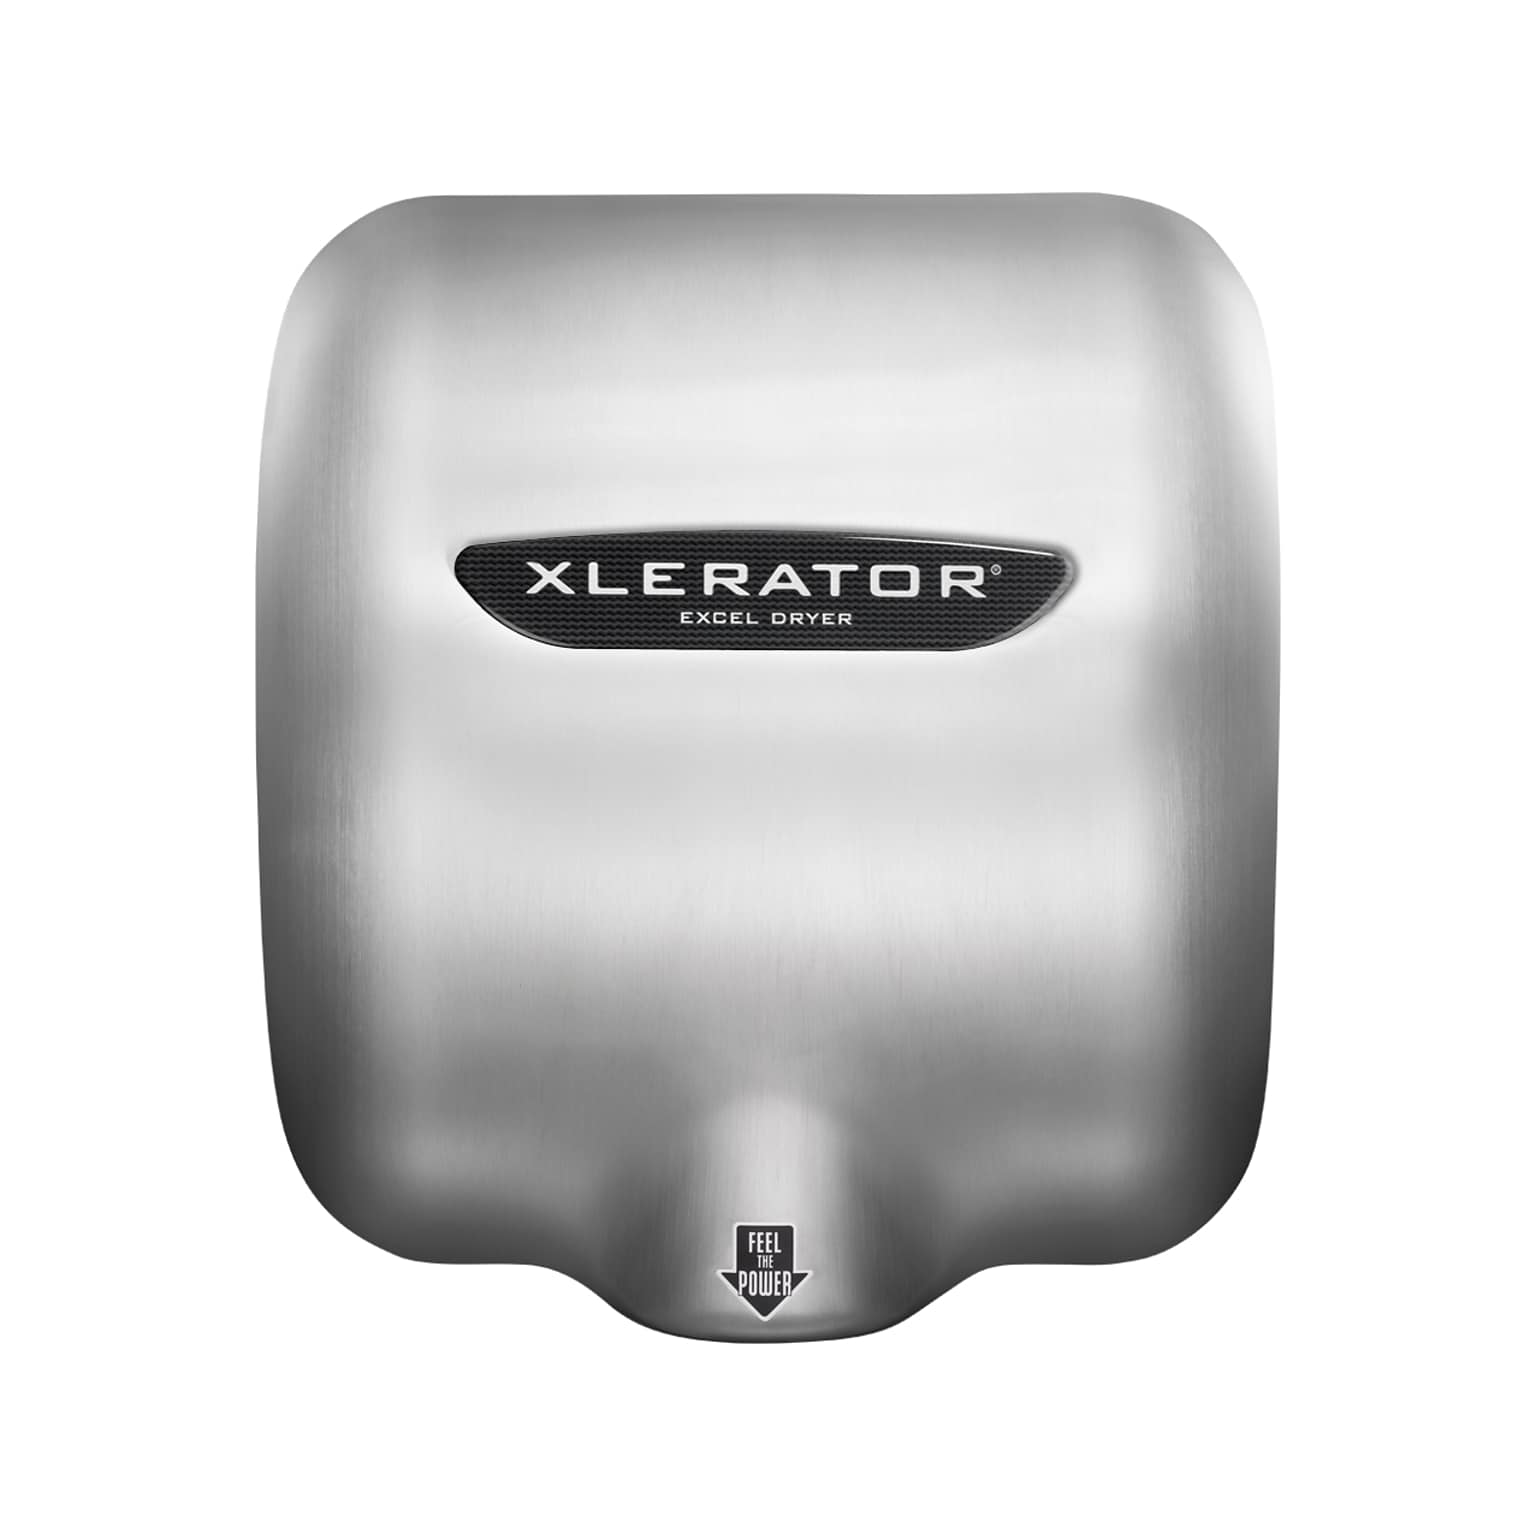 XLERATOR 208-277V Automatic Hand Dryer, Brushed Stainless Steel (604166AH)